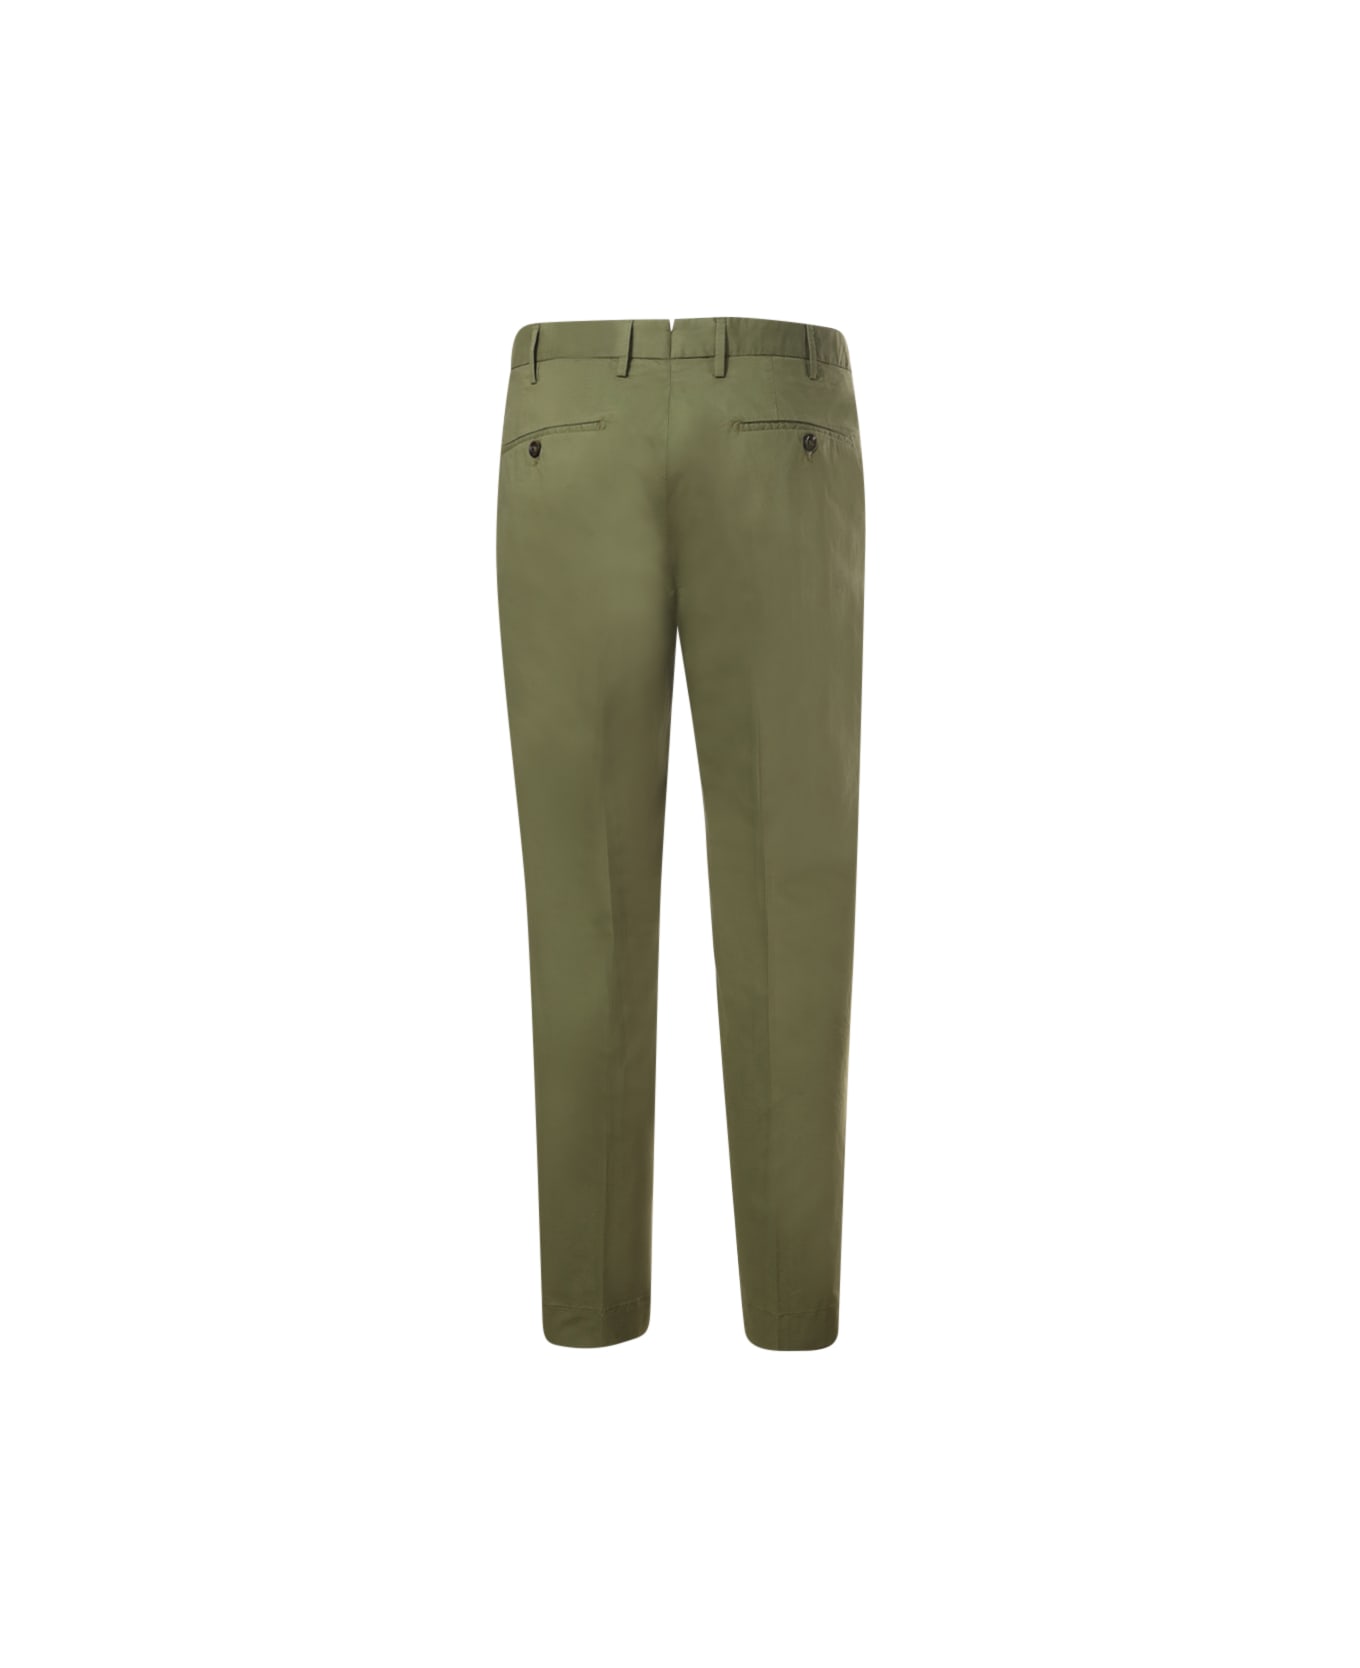 Incotex Trousers With Pleats - Green ボトムス